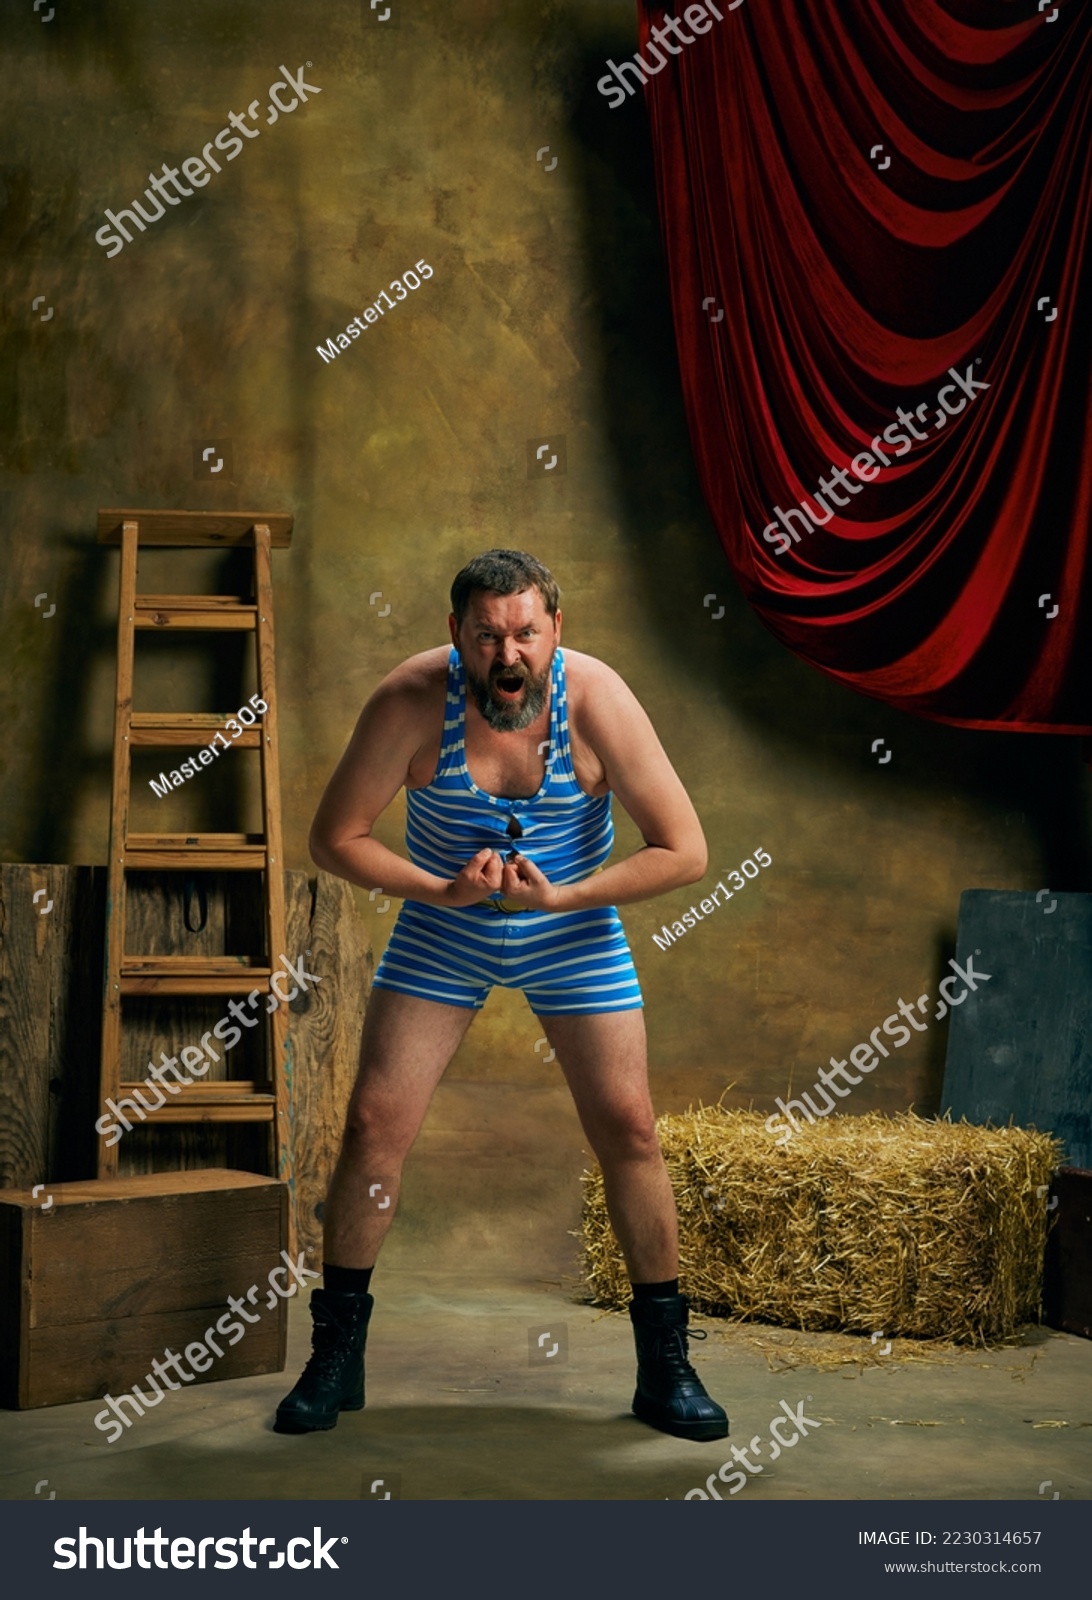 Winner emotions. Mature man, retro circus strongman wearing striped sports swimsuit shouting isolated over dark vintage circus backstage background. Art, 30s, 40s fashion style and inspiration #2230314657